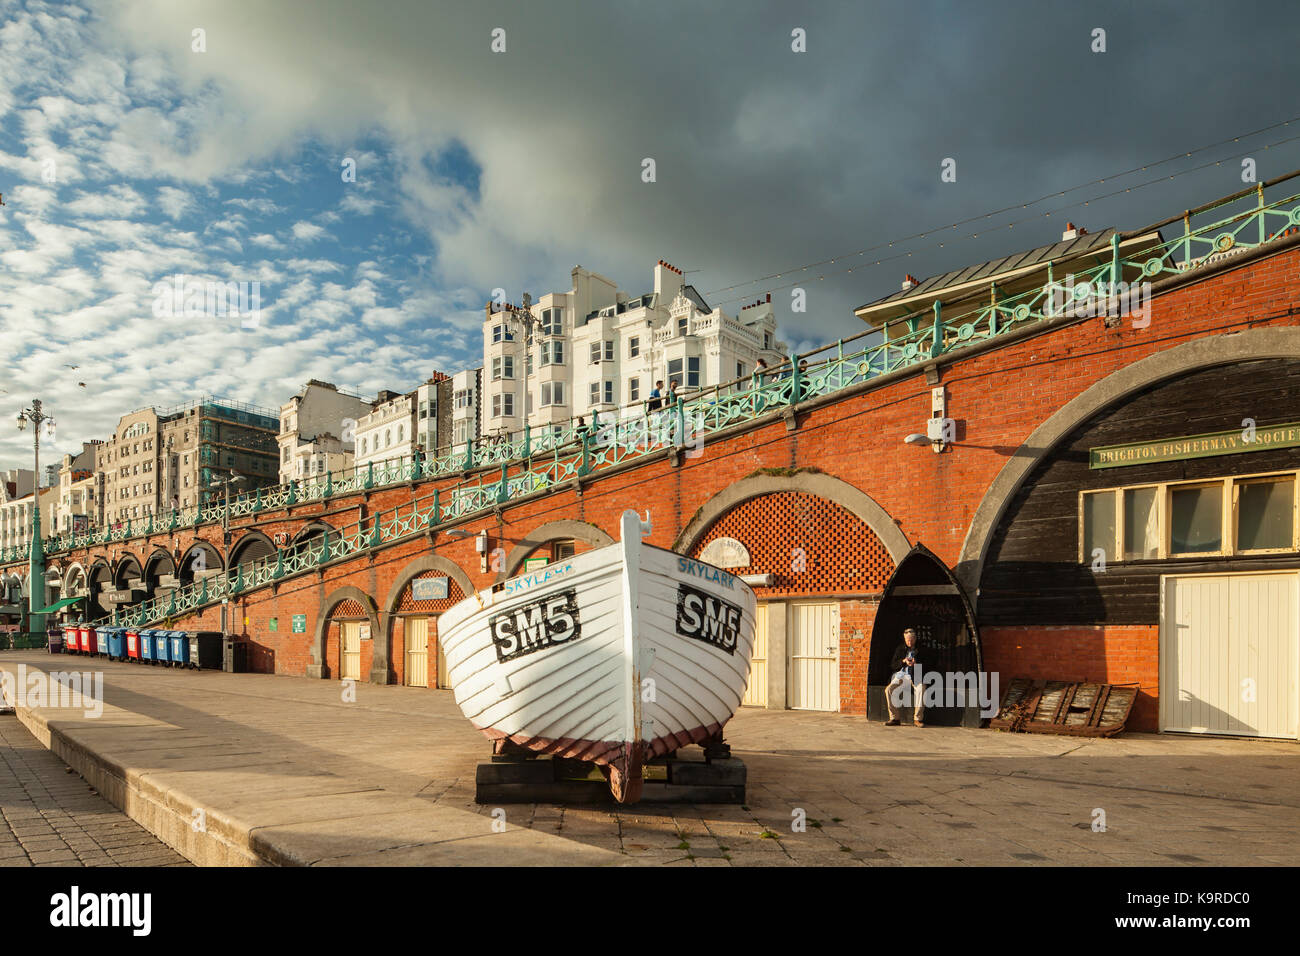 Fishing Museum on Brighton seafront, East Sussex, England. Stock Photo